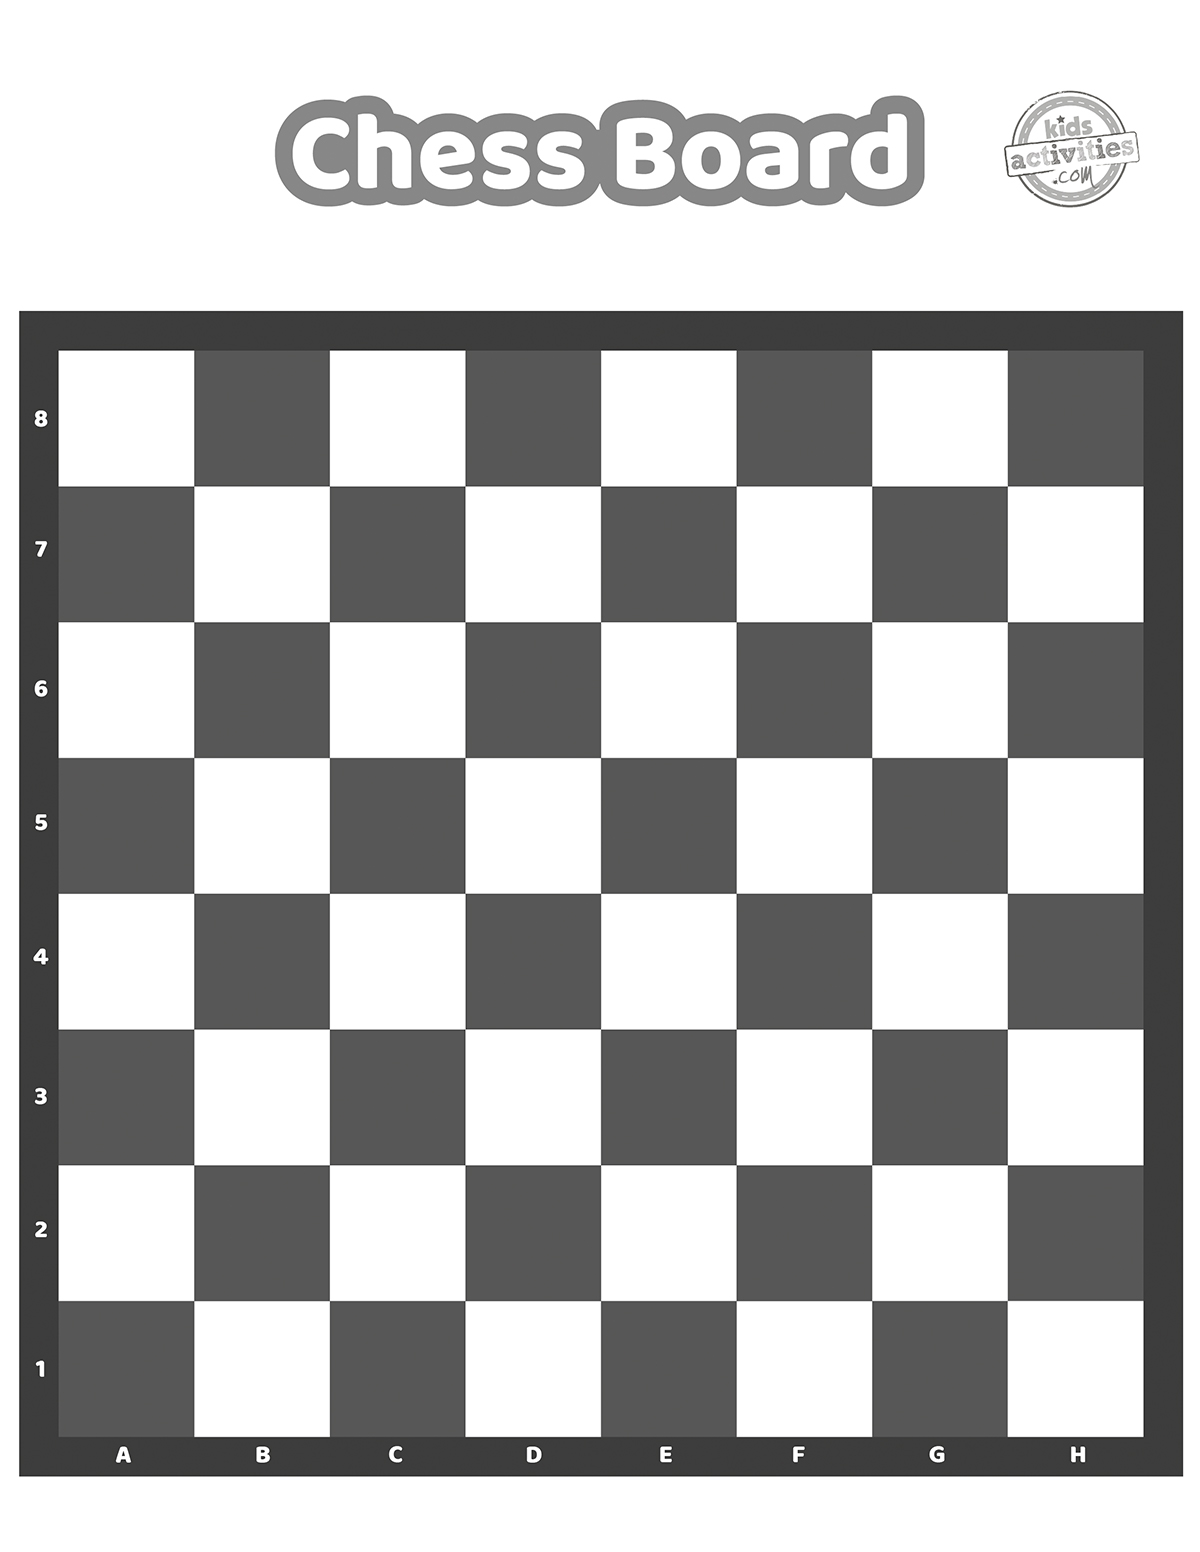 Black & white printable chess board page with A to H on the horizontal axis and 1 to 8 on the vertical axis. 